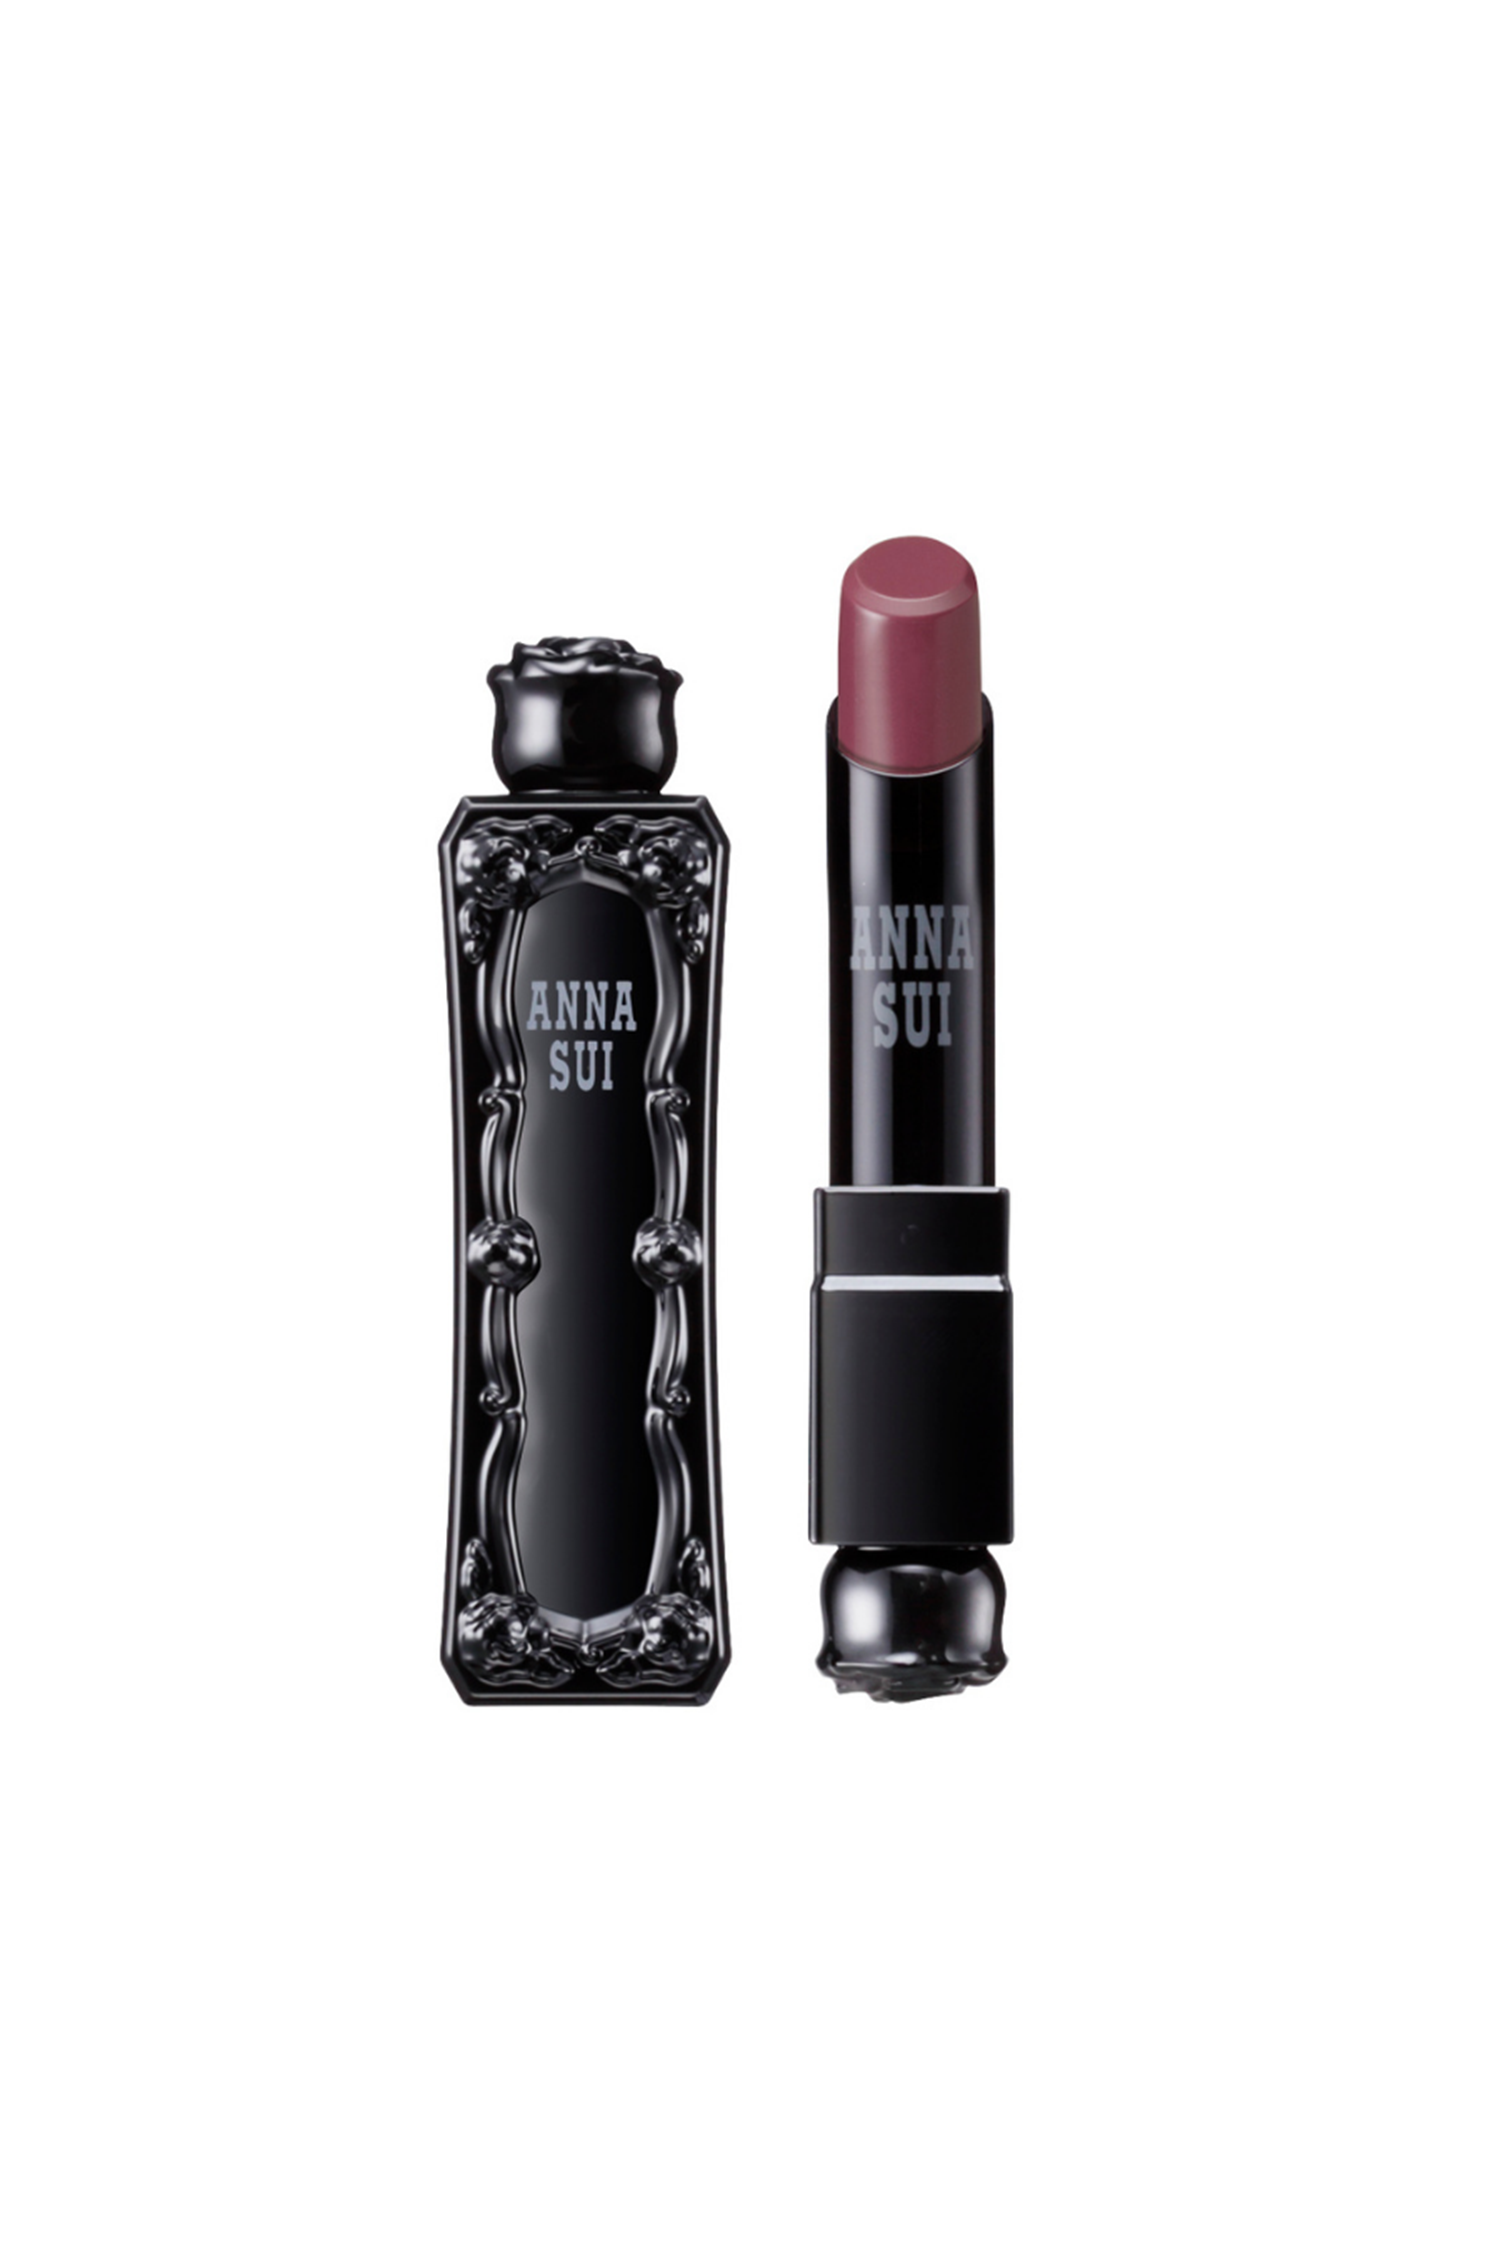 Iris lipstick, in an Anna Sui, black container with raised rose pattern, rose on top 